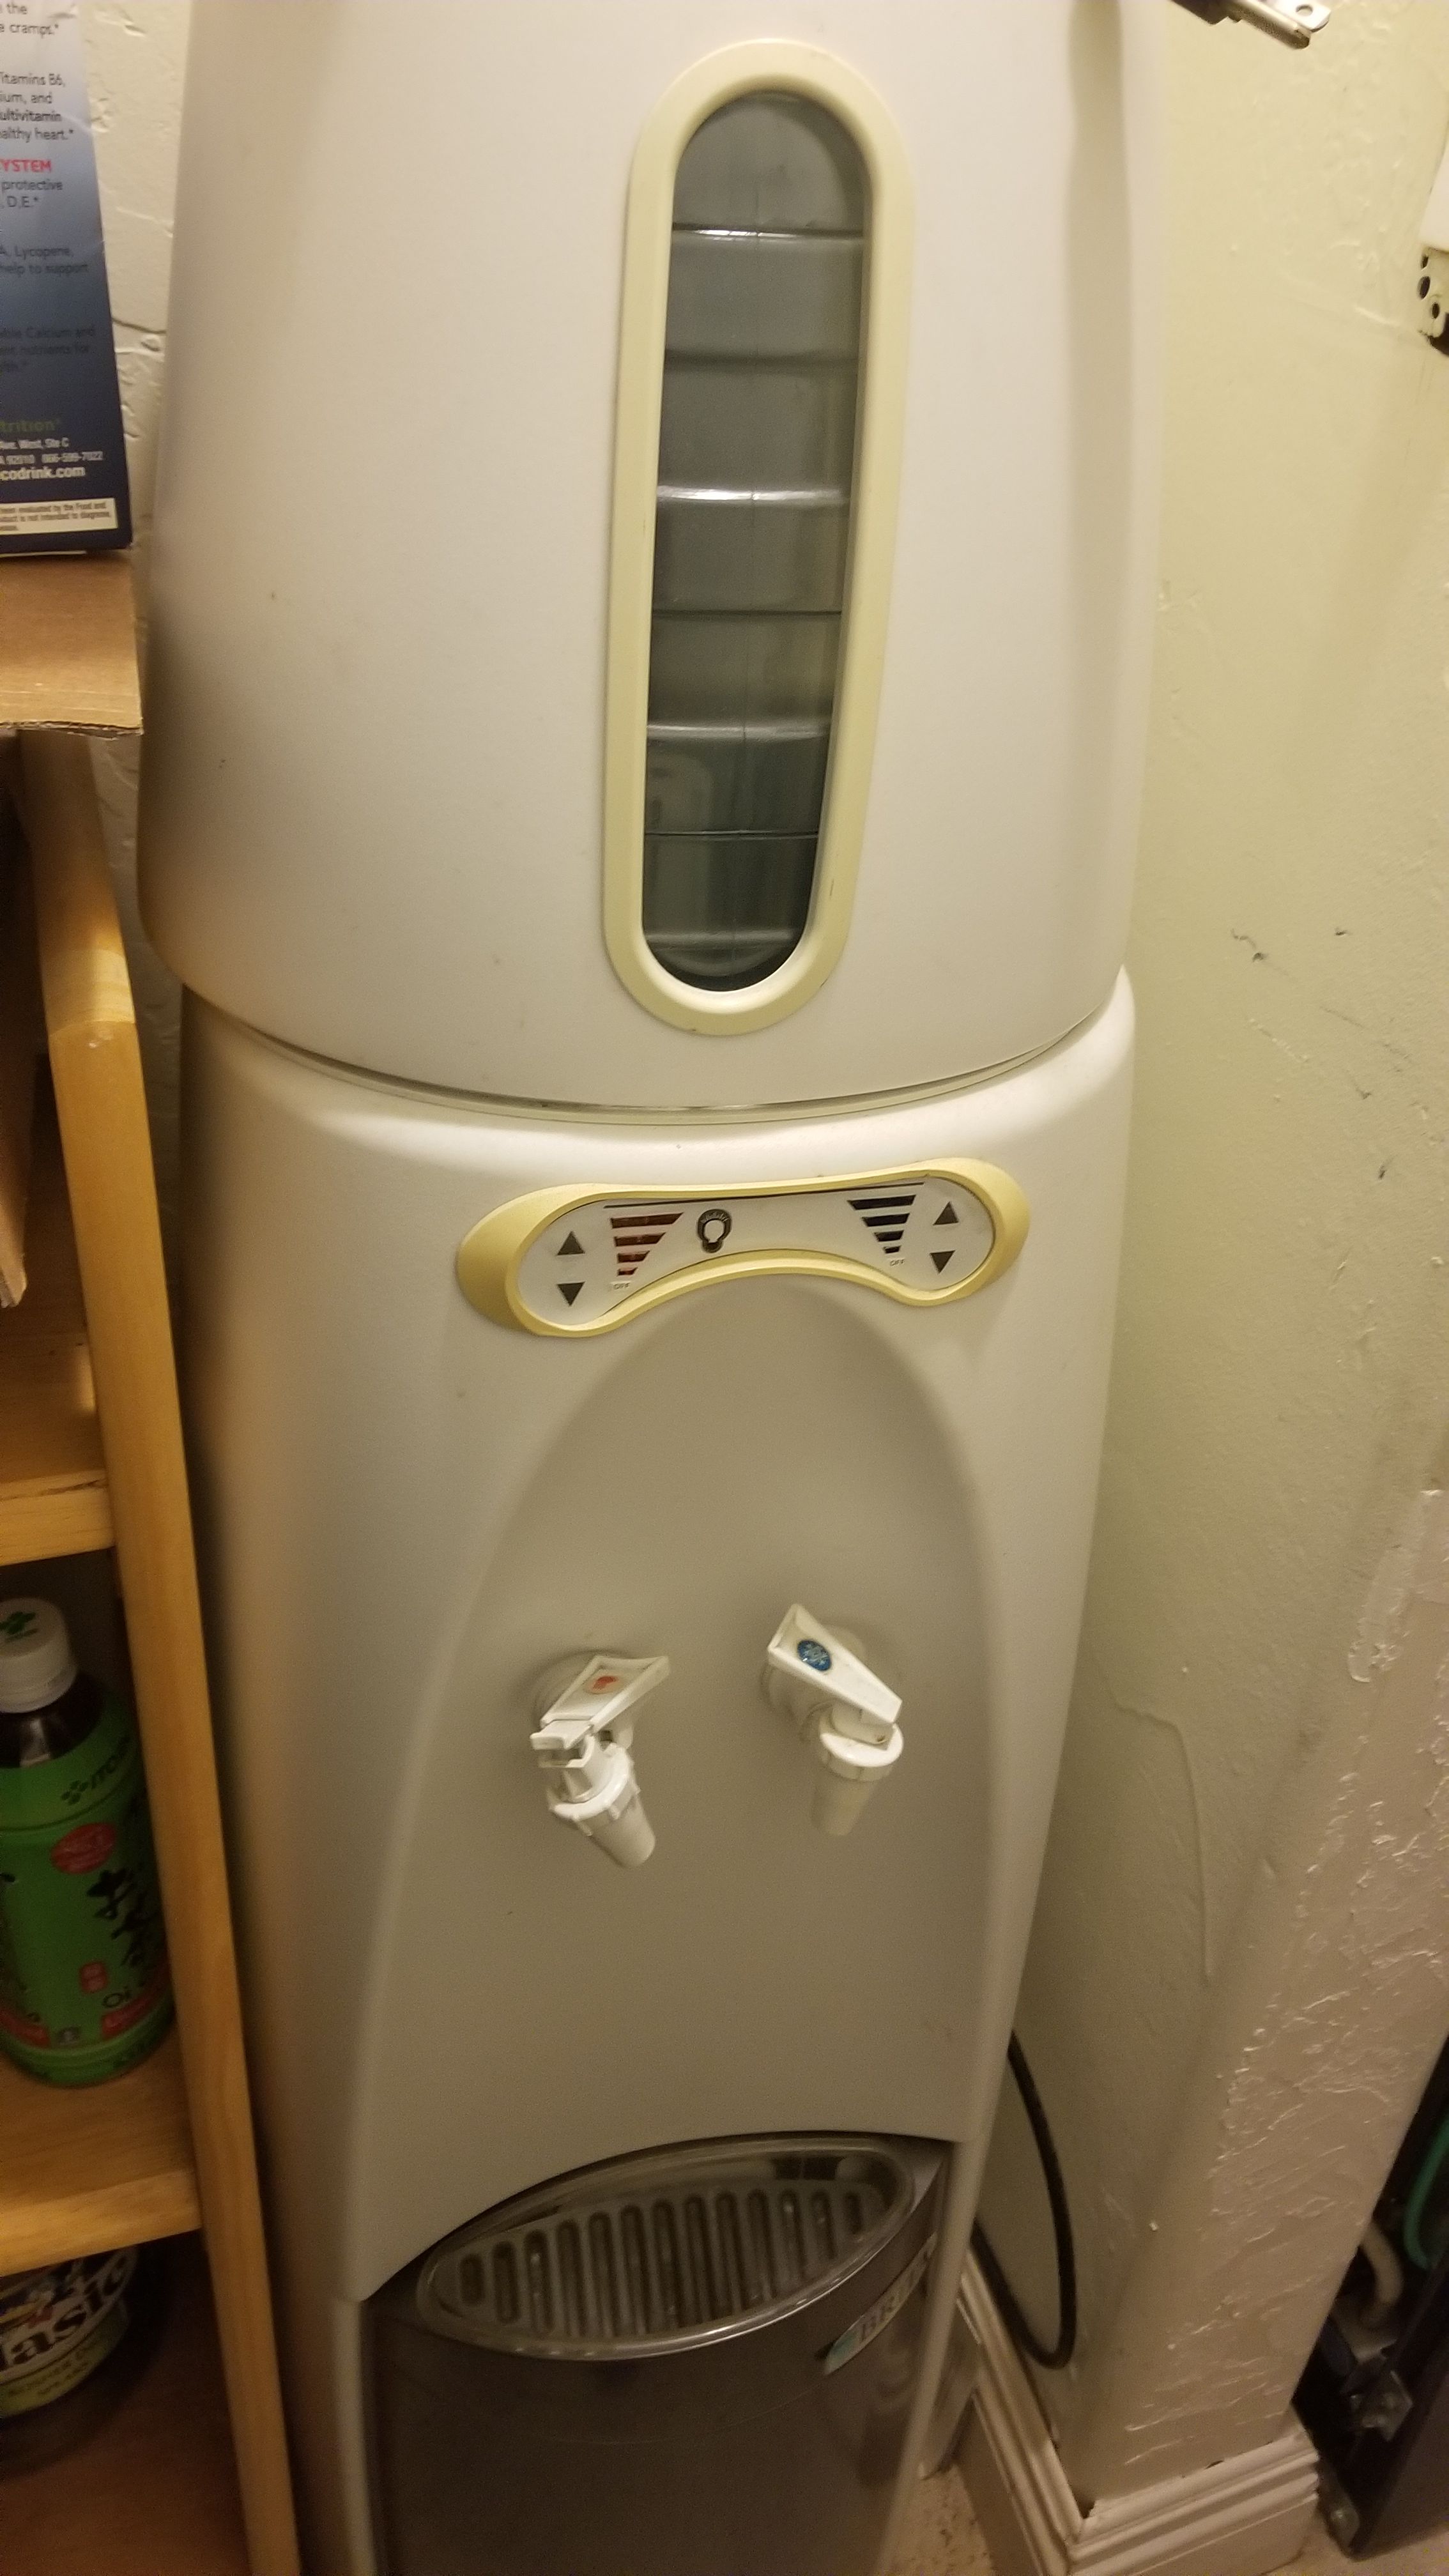 Britta water cooler and water heater